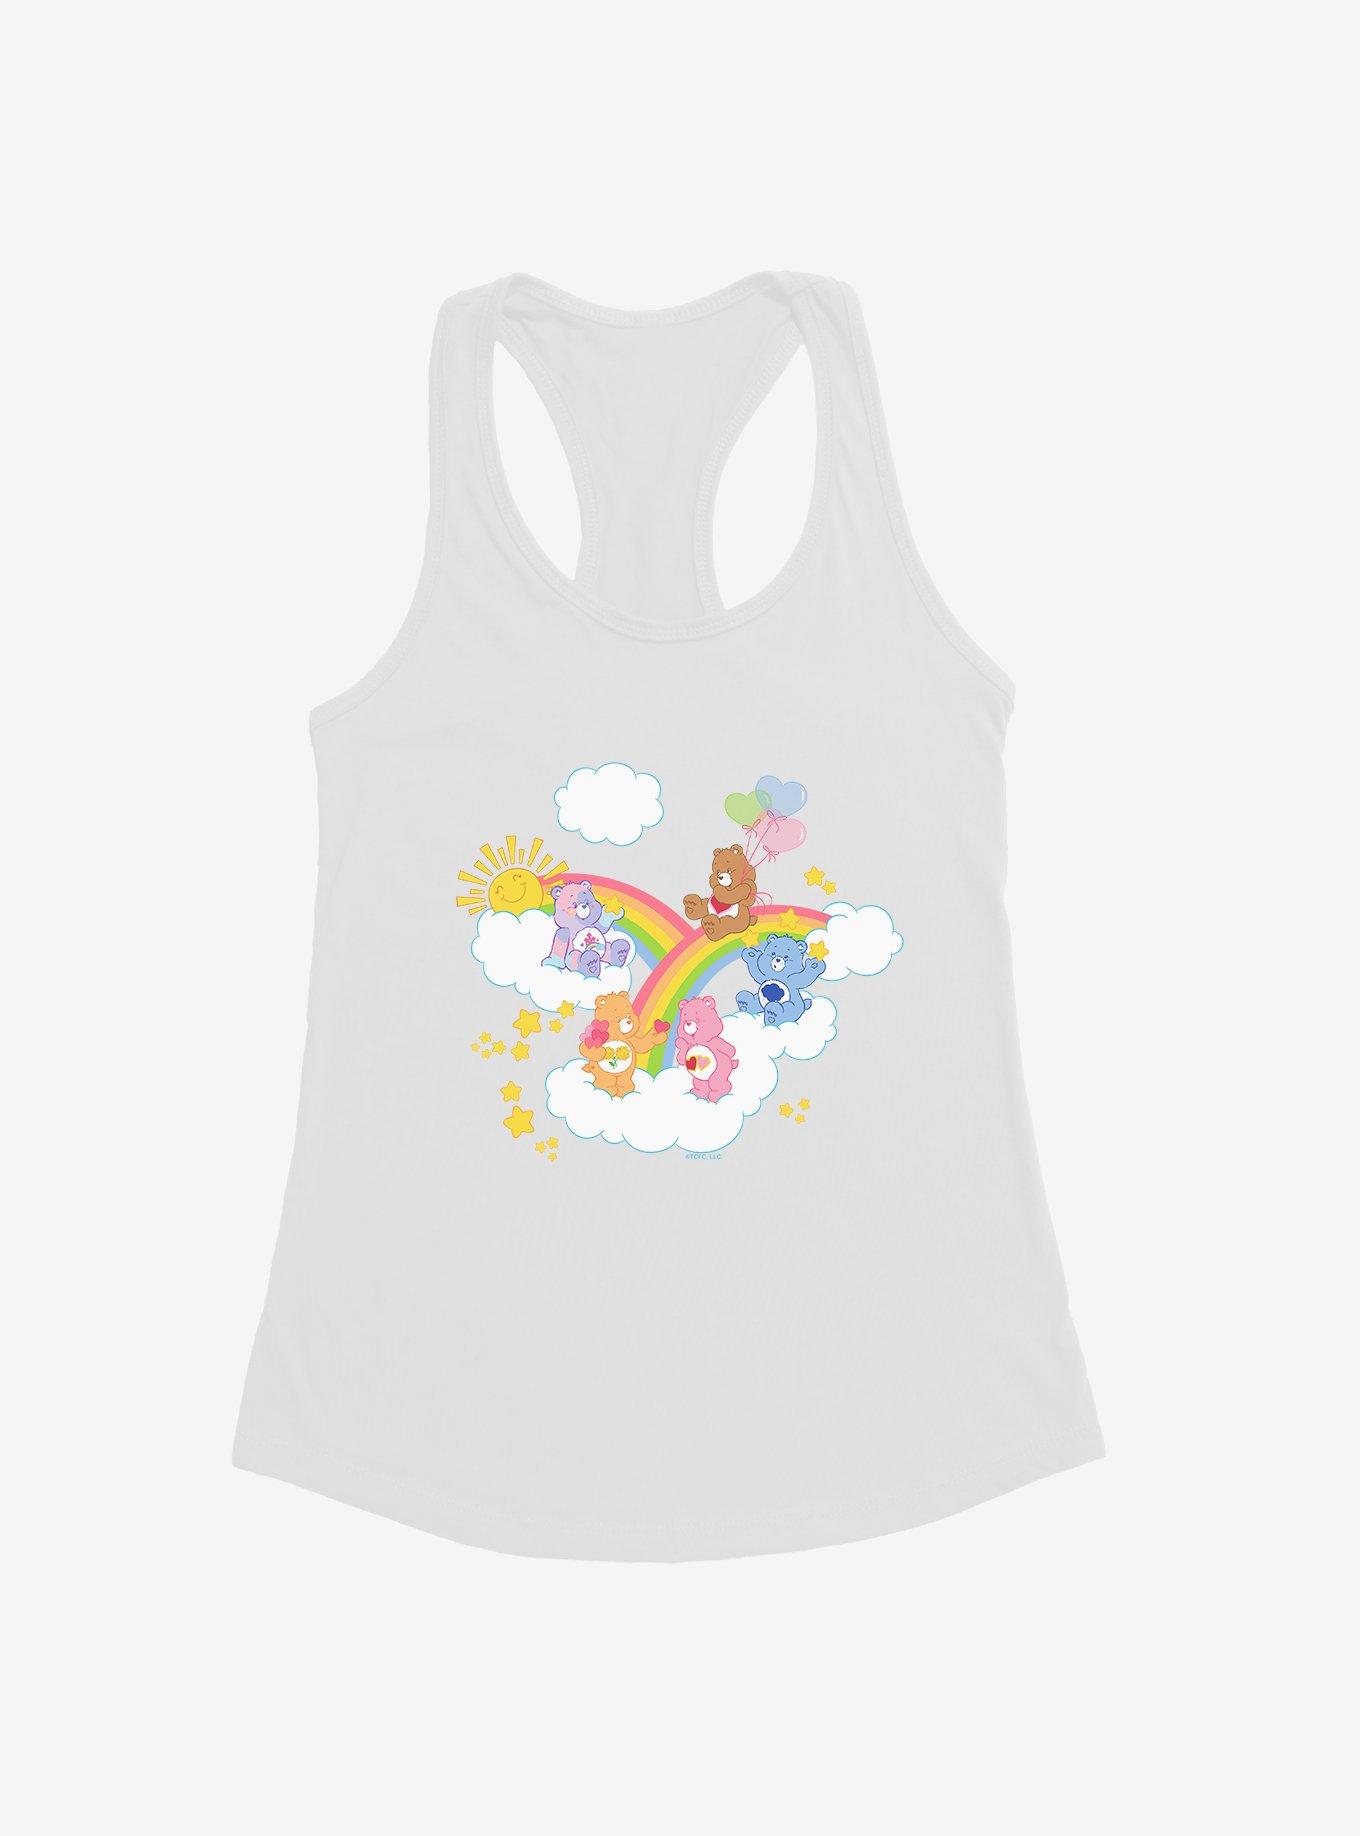 Care Bears Over The Rainbow Girls Tank Top, WHITE, hi-res